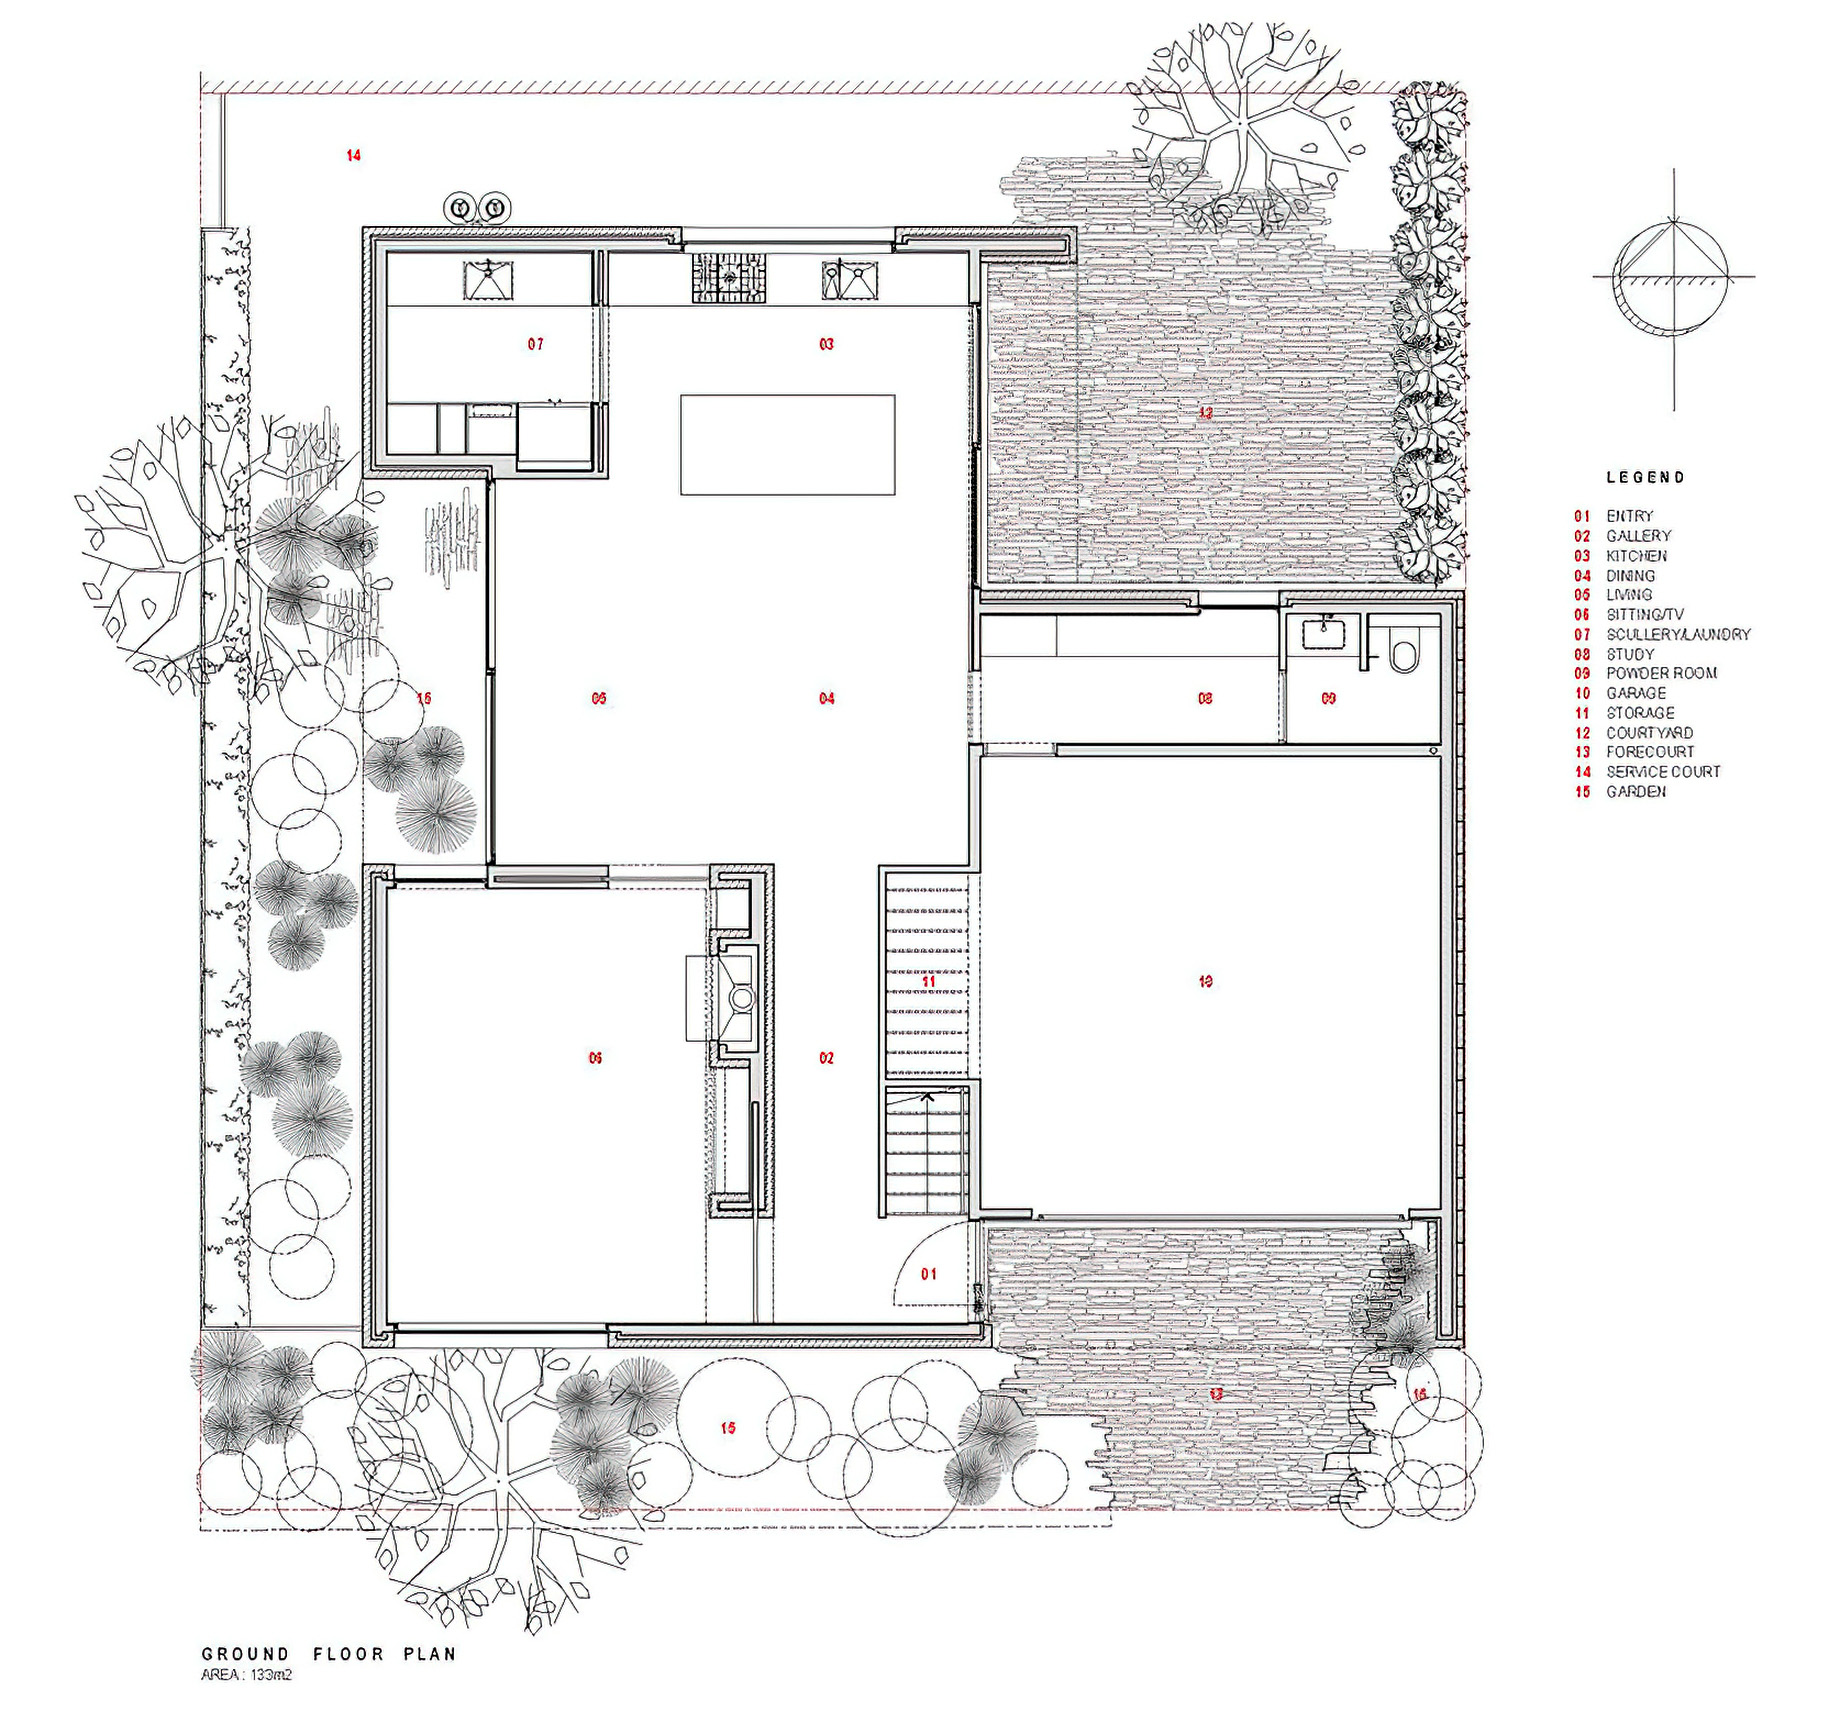 Ornsby House – Conference Street, Christchurch, New Zealand – Floor Plan